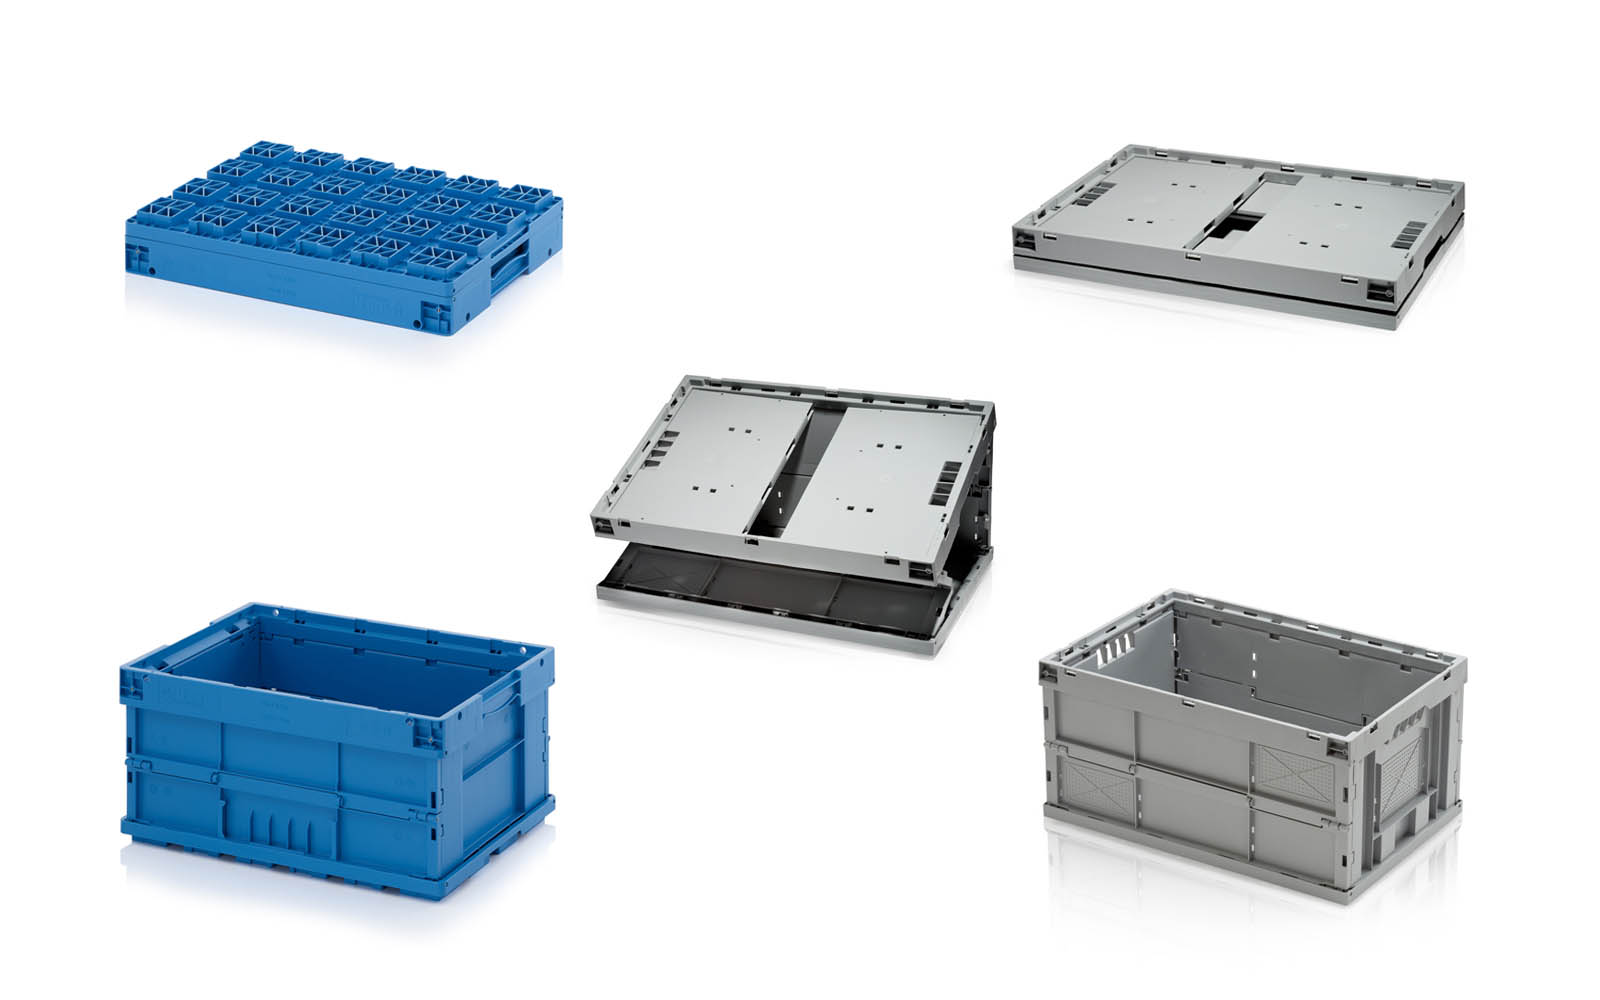 Collapsible crates